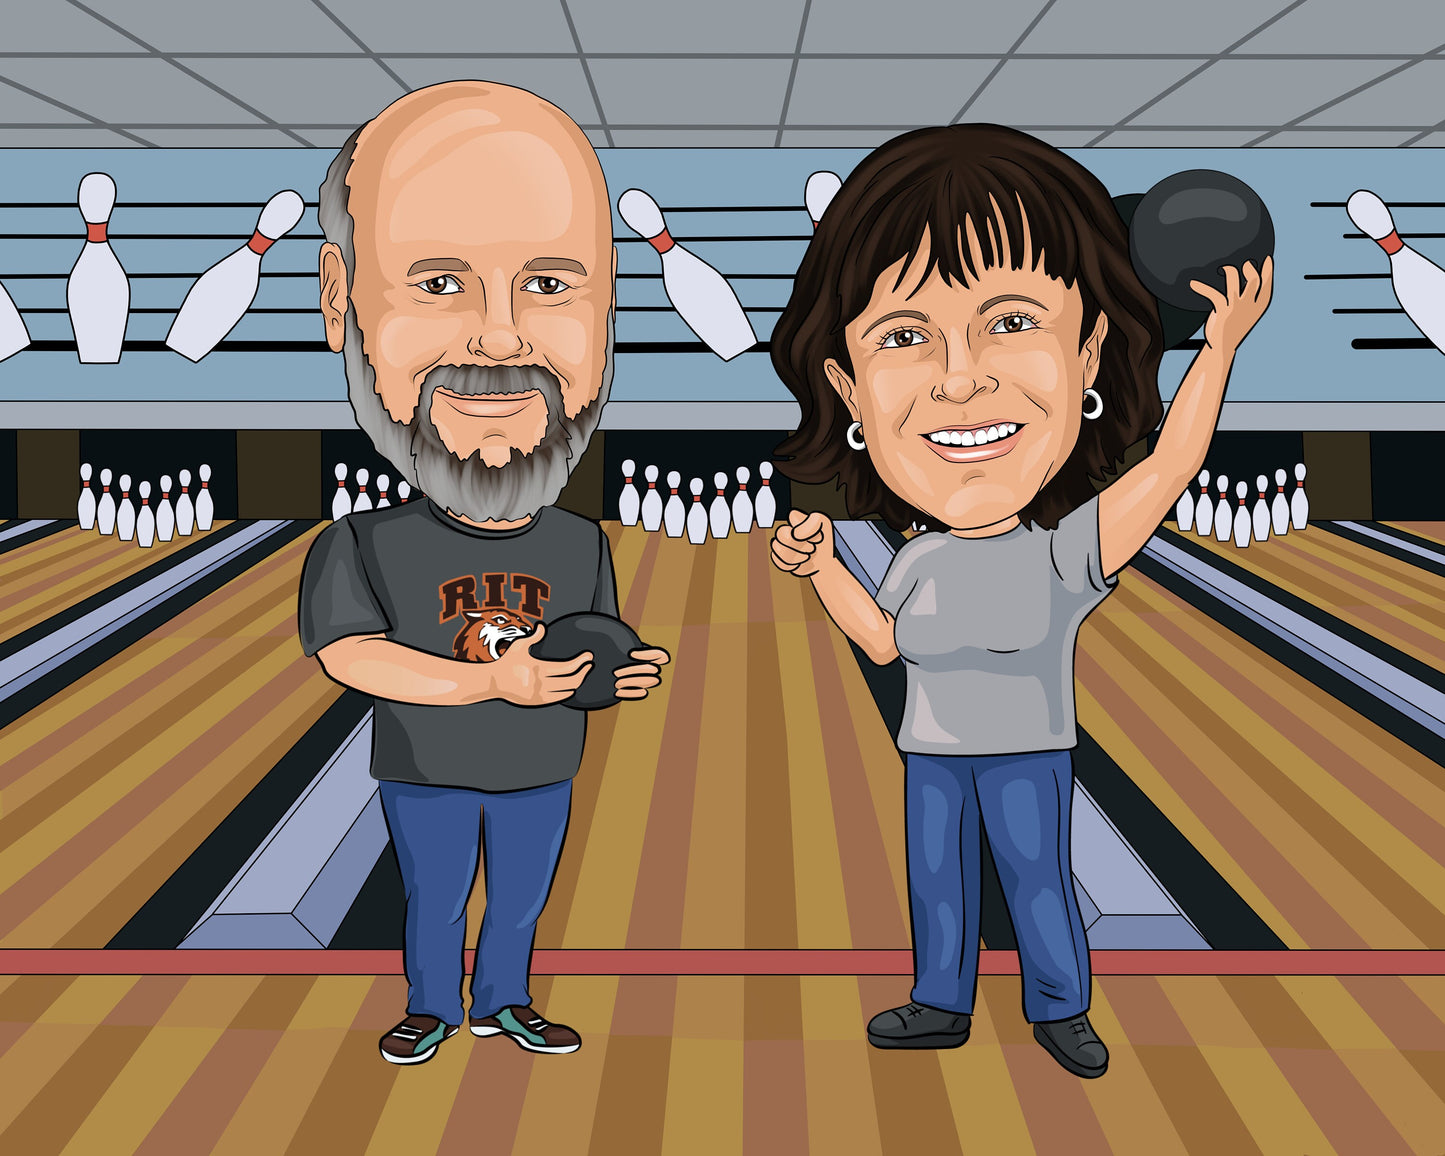 Bowler Gift - Custom Caricature Portrait From Your Photo/bowling coach gift/bowling player gift